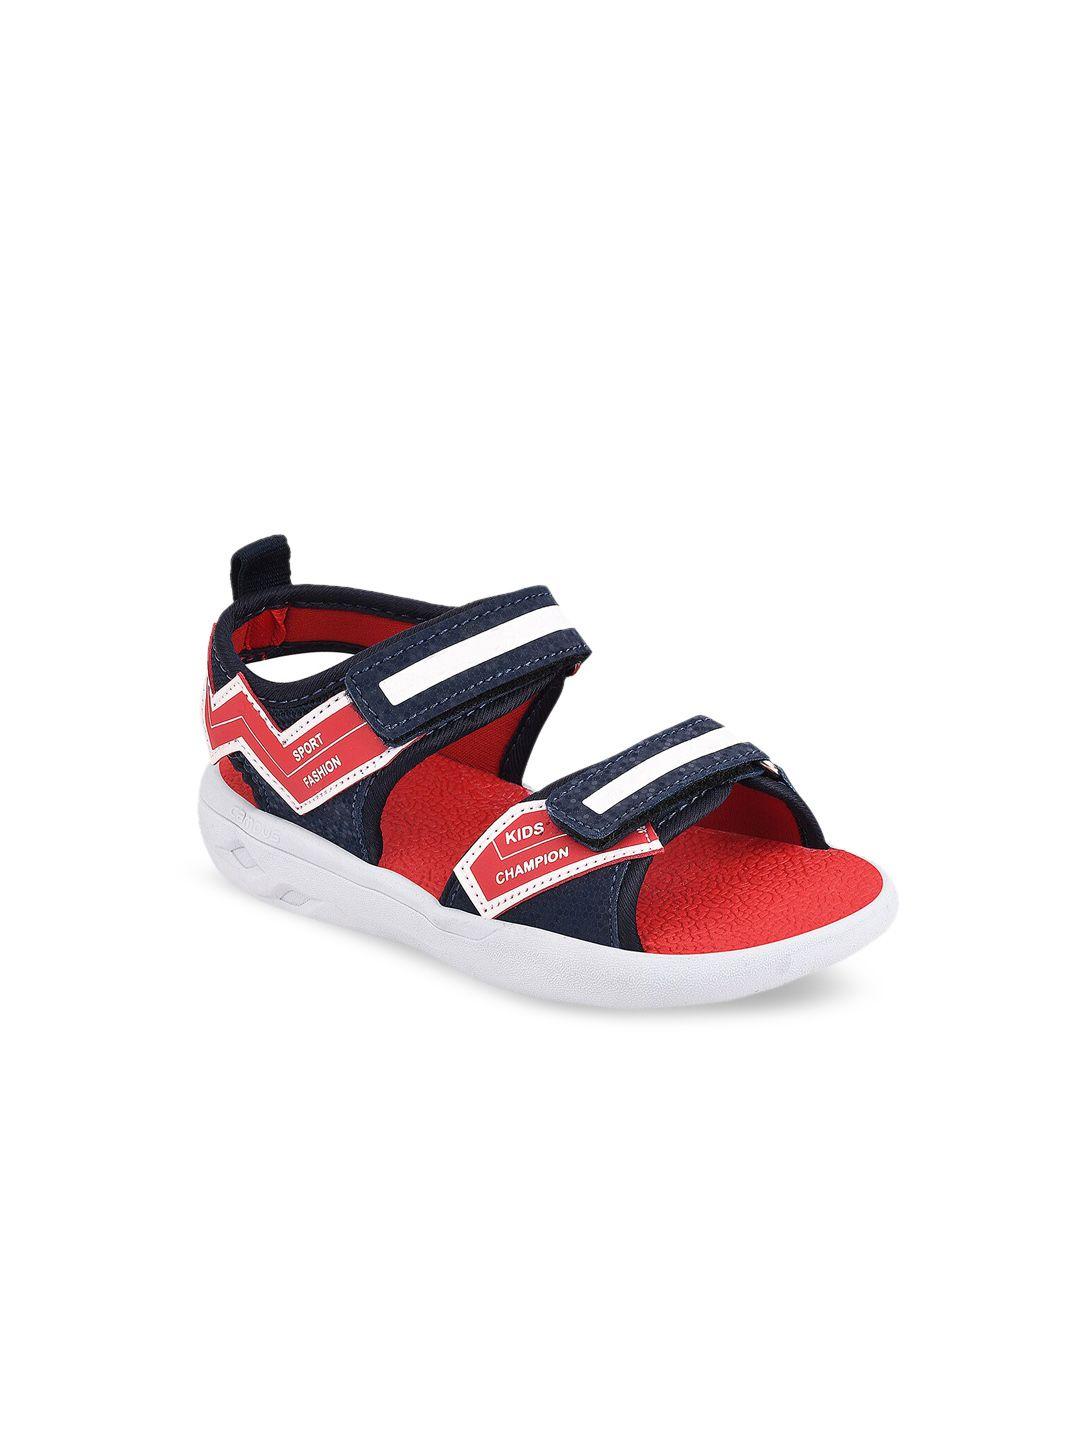 campus kids navy blue & red solid sports sandals